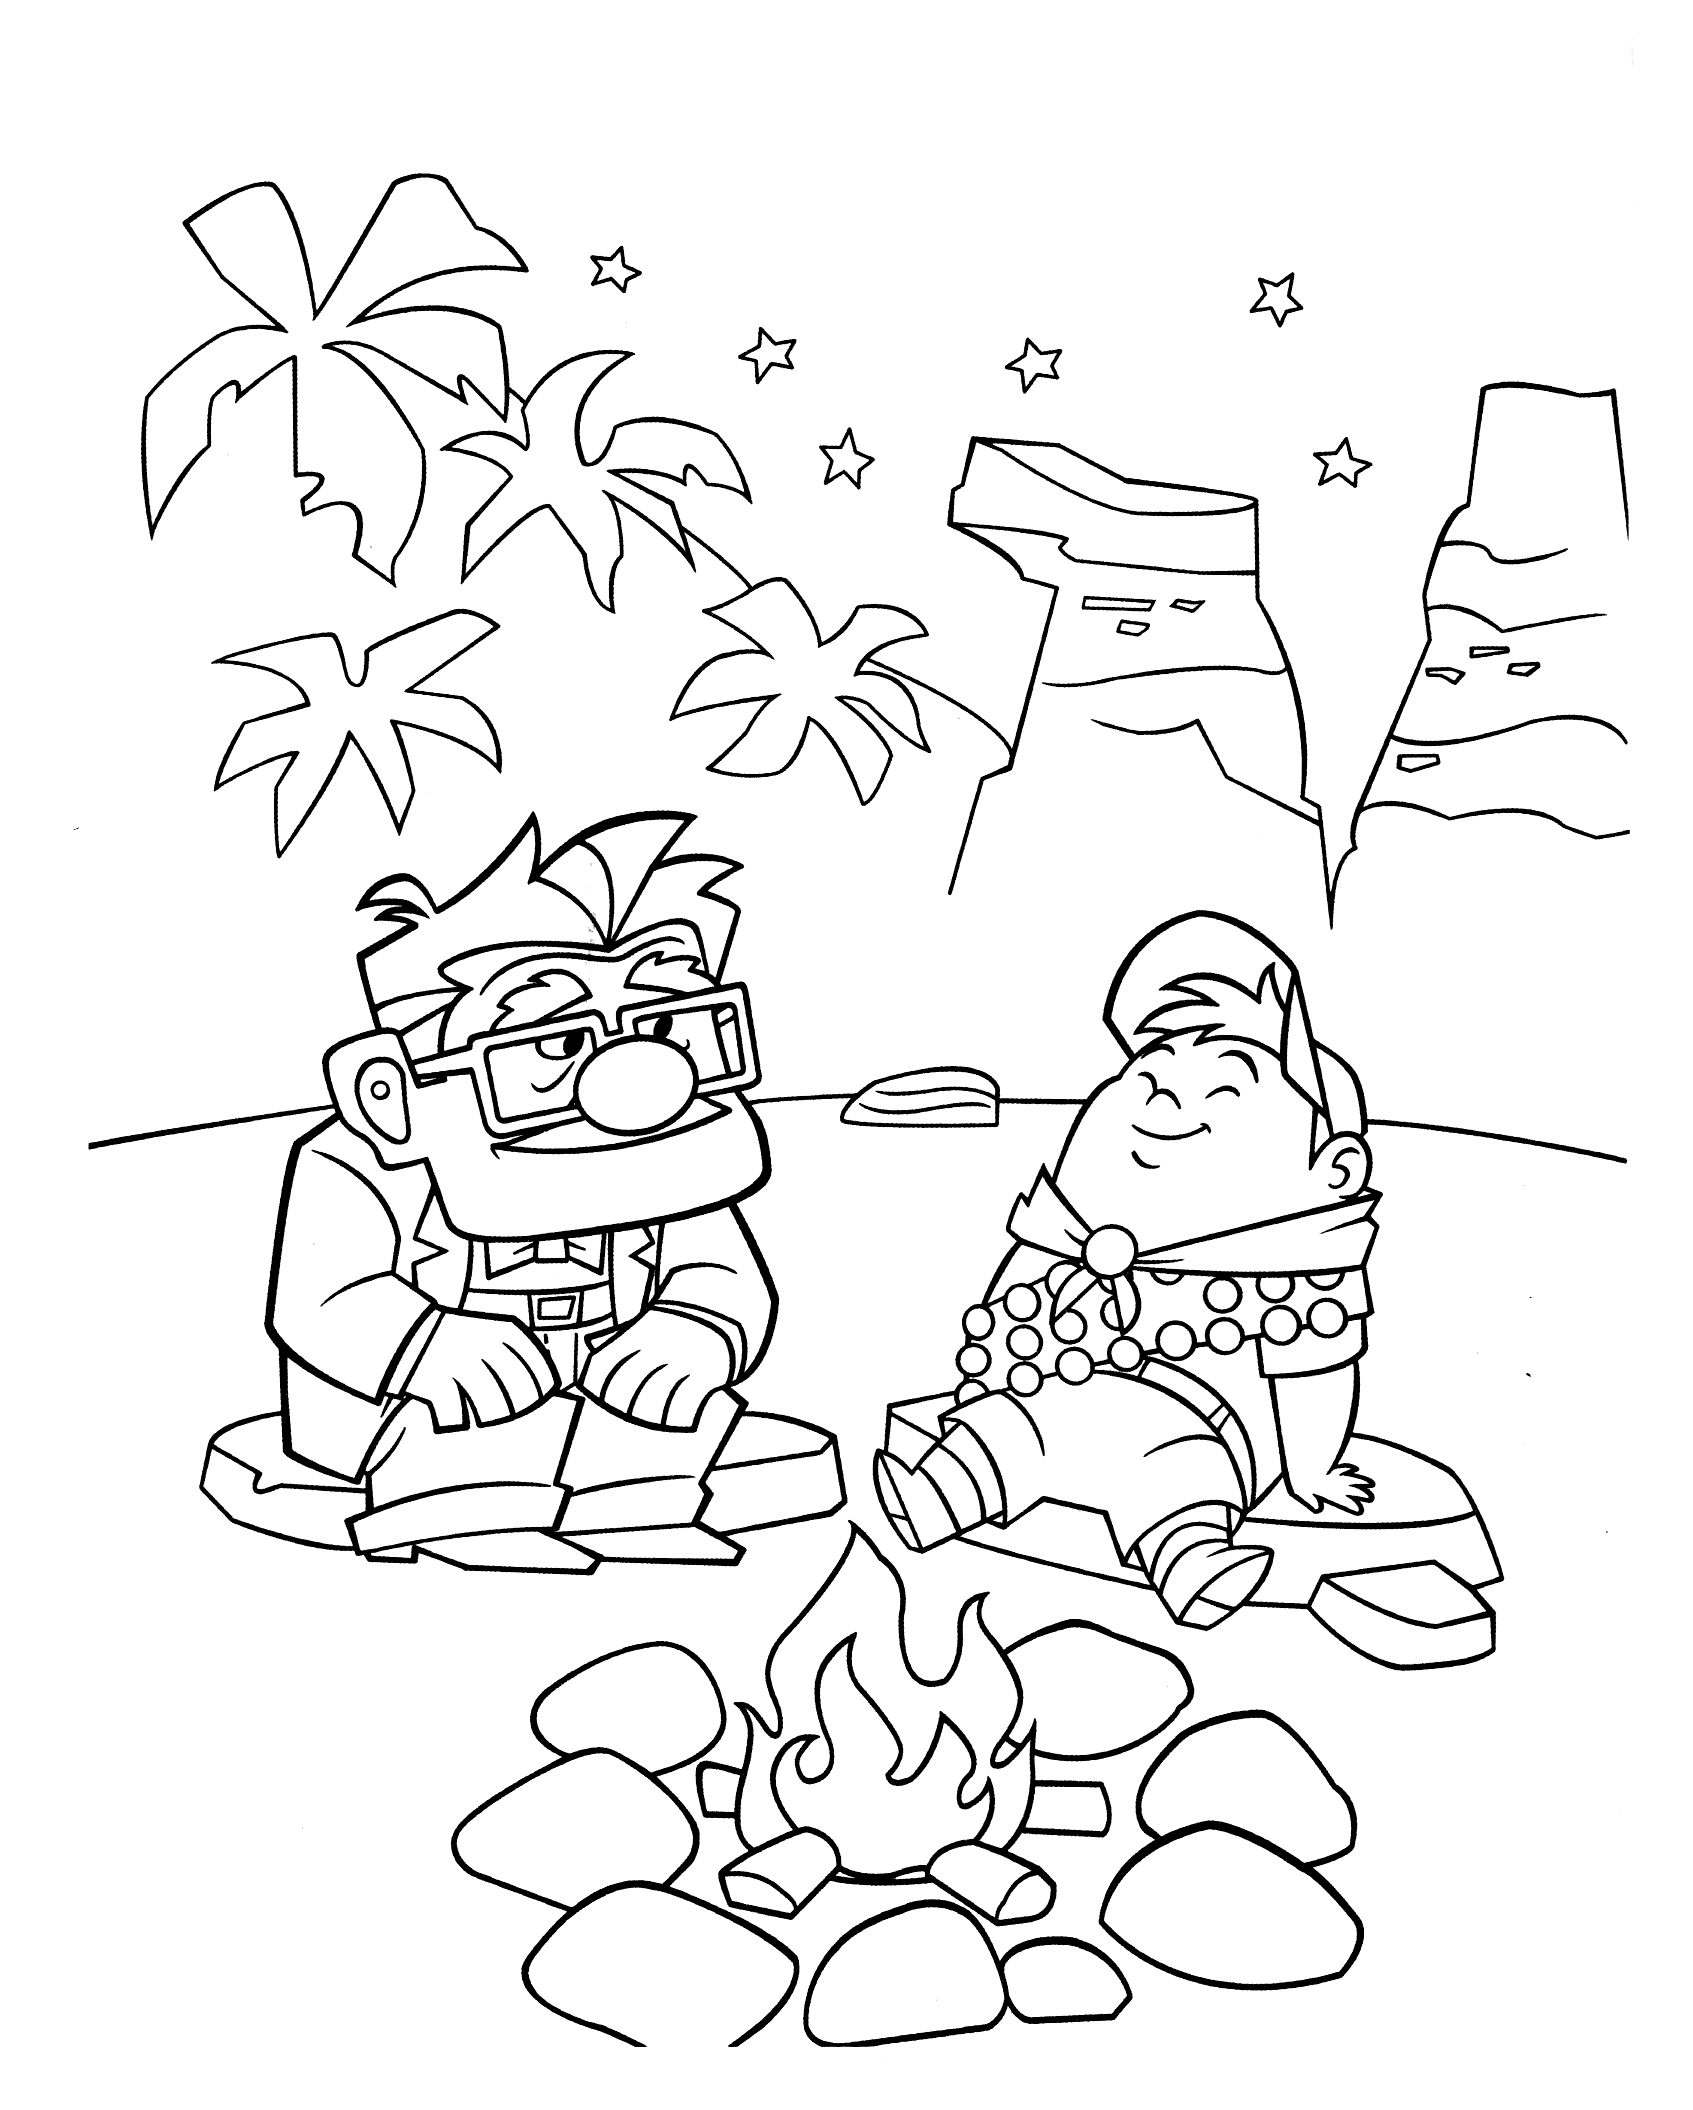 Coloring page - Bonfire in the night